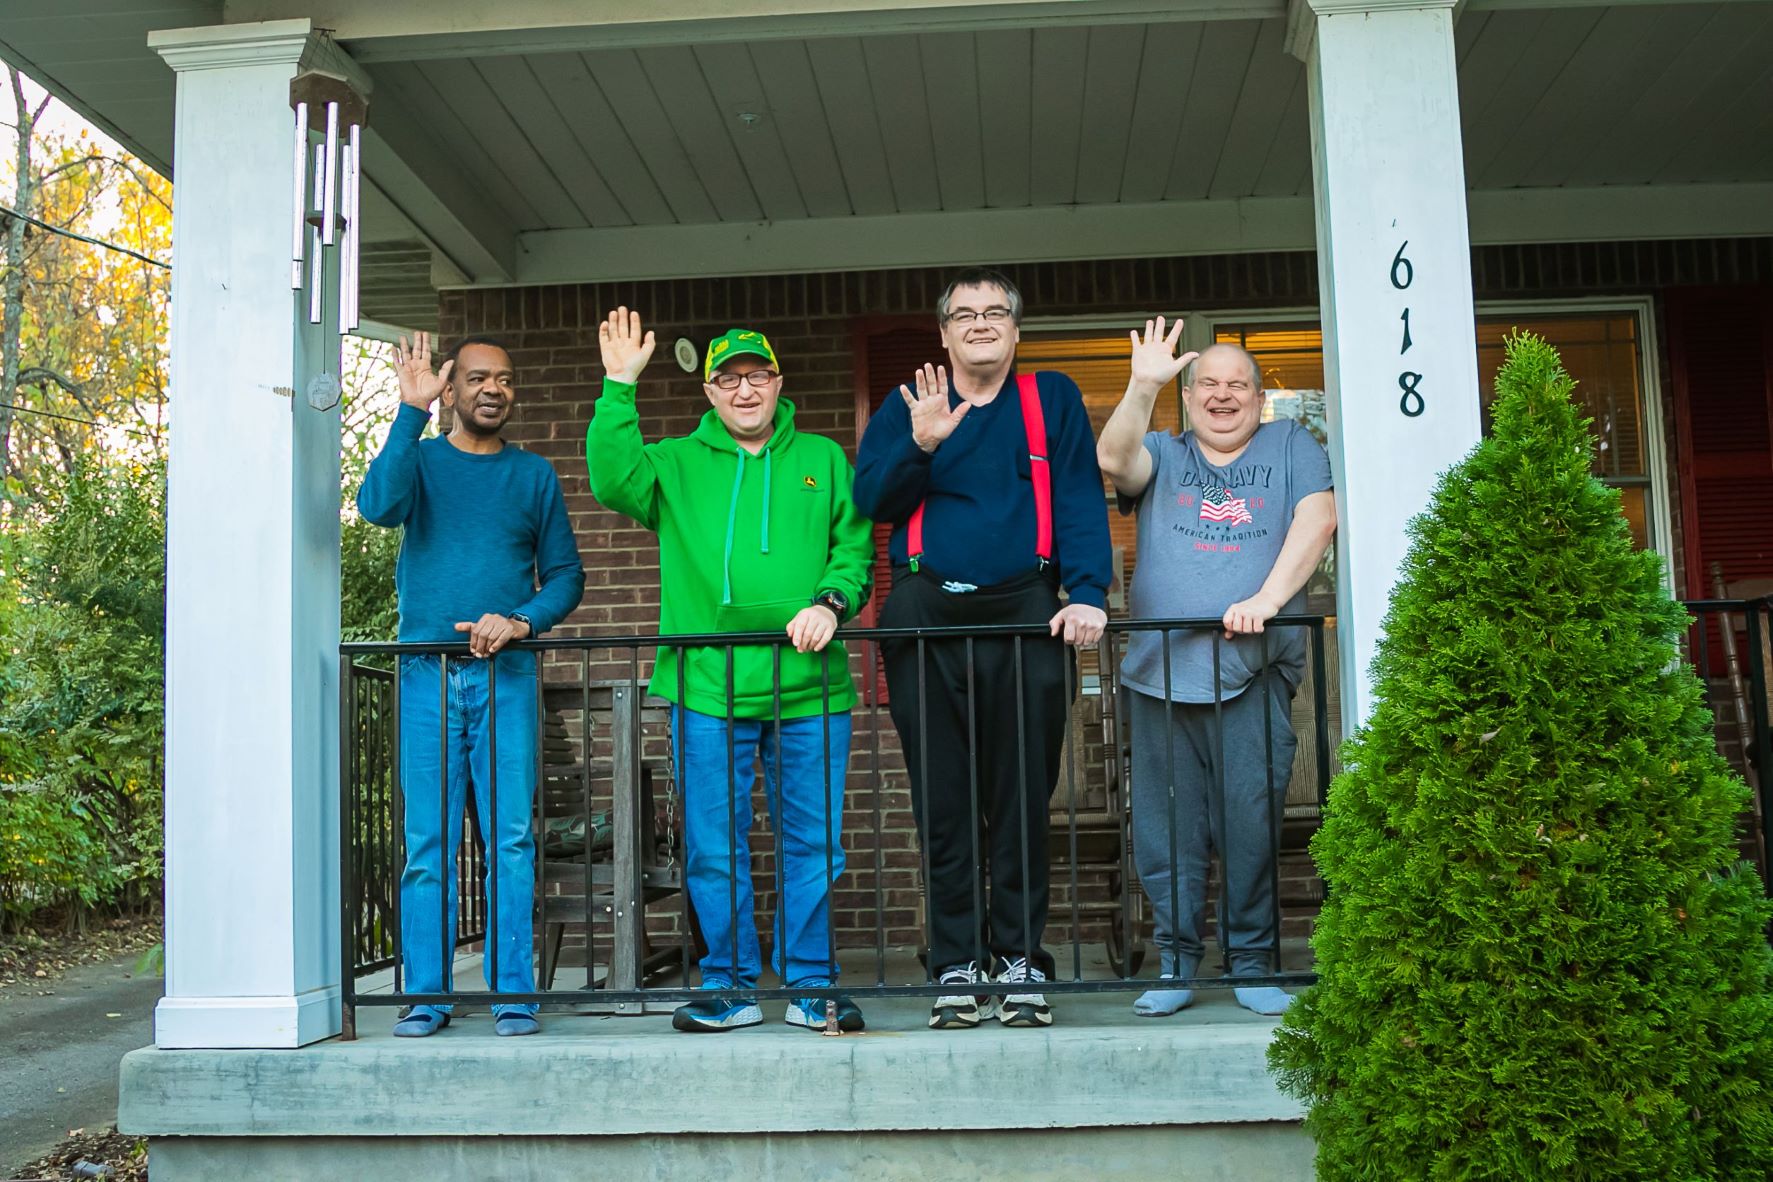 Four people supported by ANCOR member organization standing on a porch and waving at the camera.